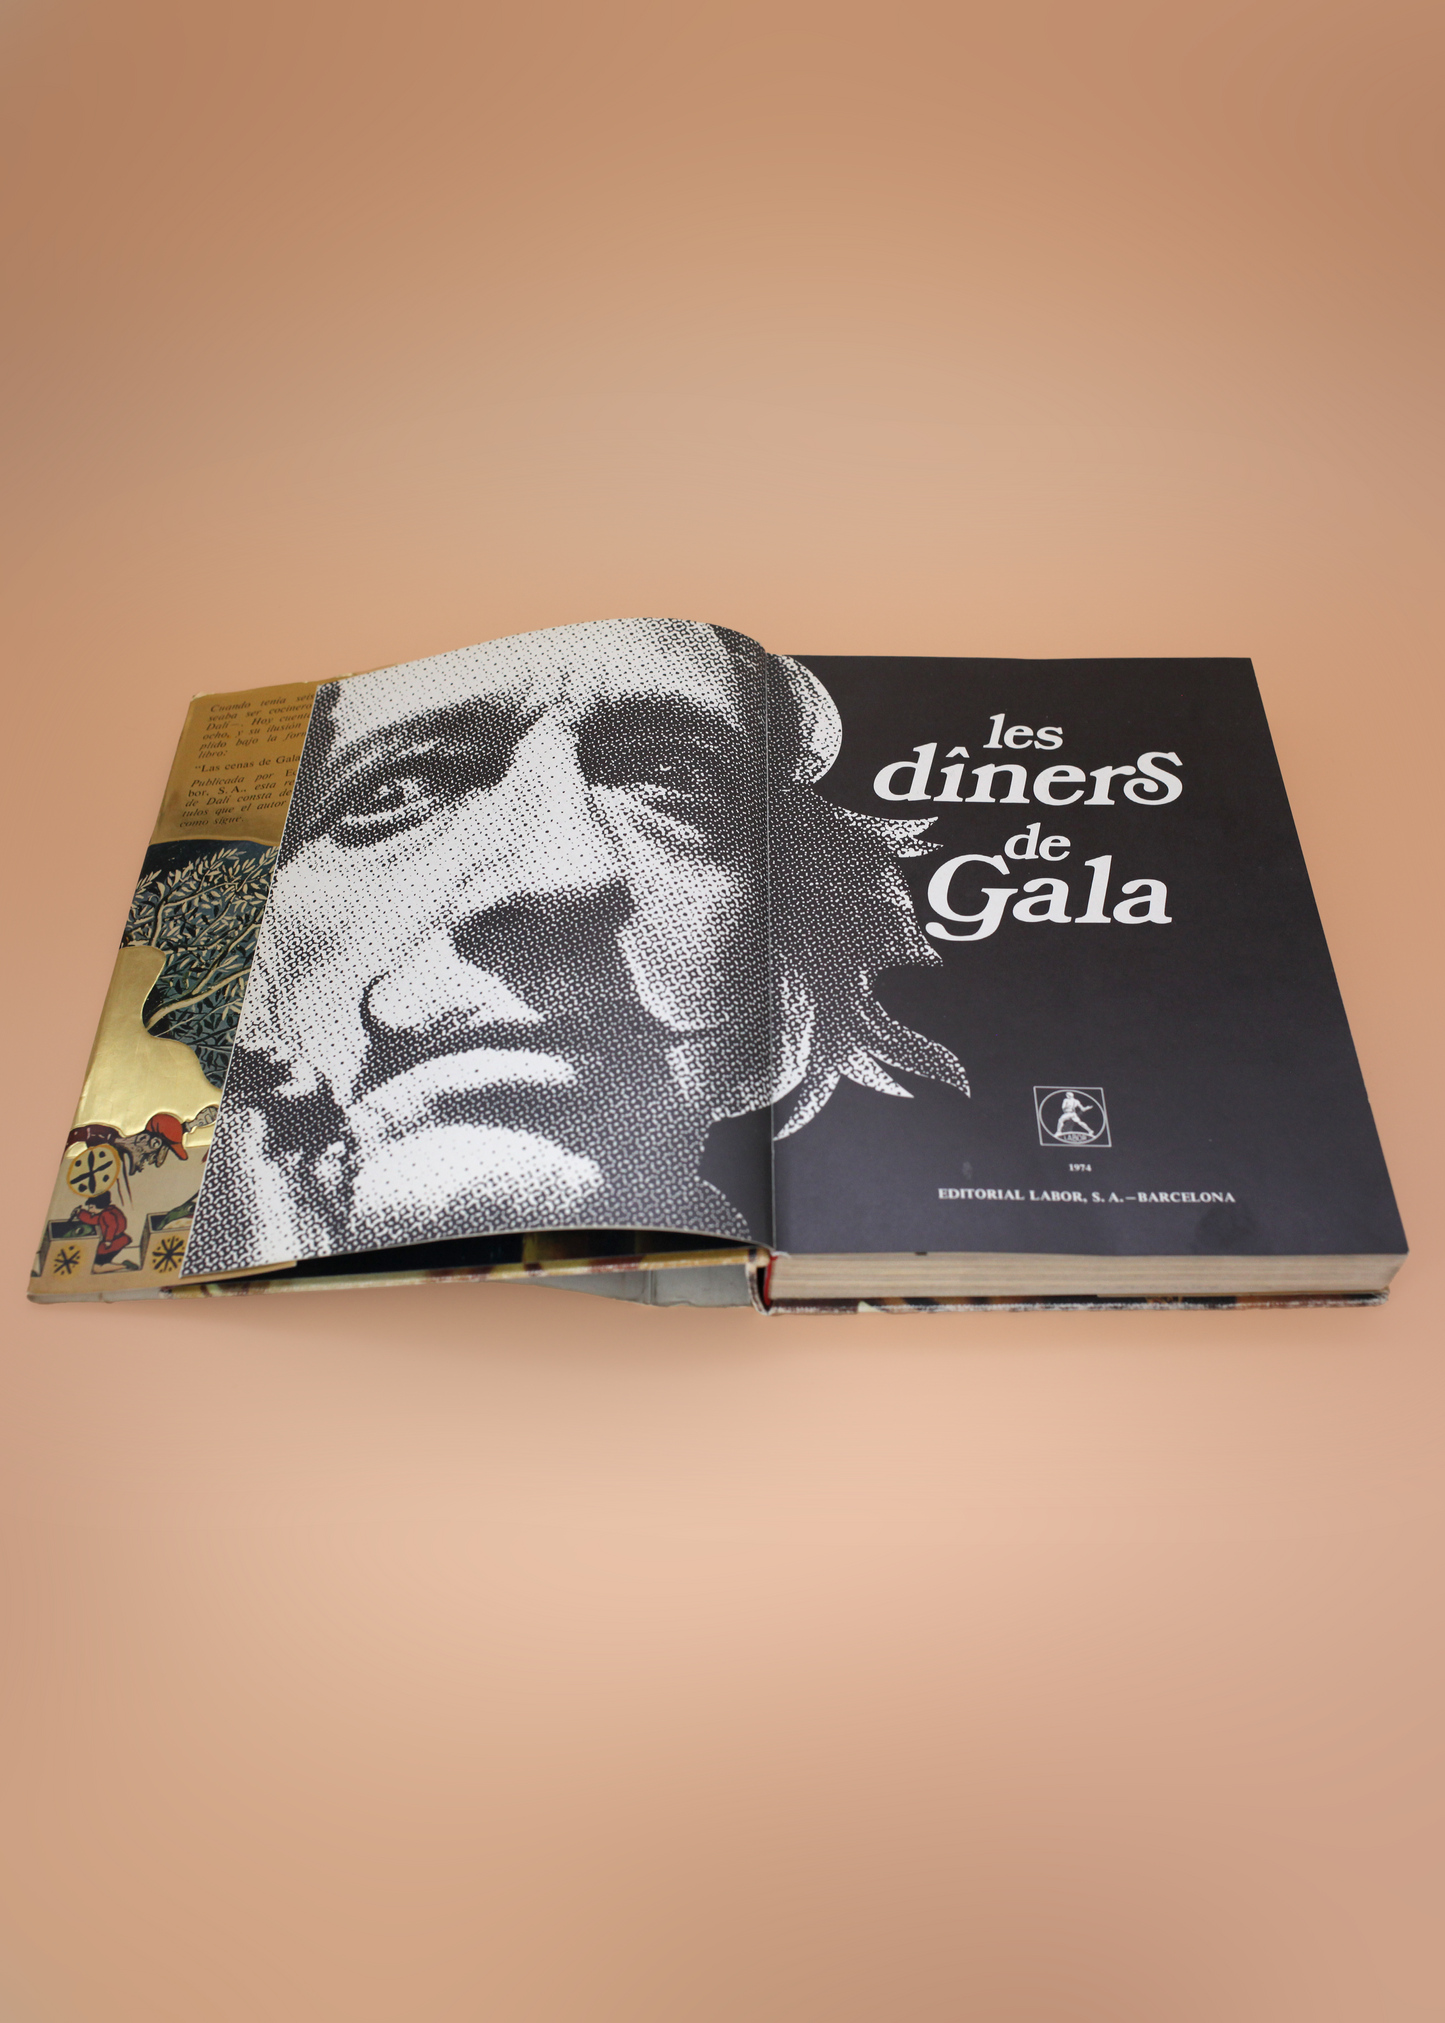 Les diners de Gala. Barcelona: 1974. First Spanish Edition